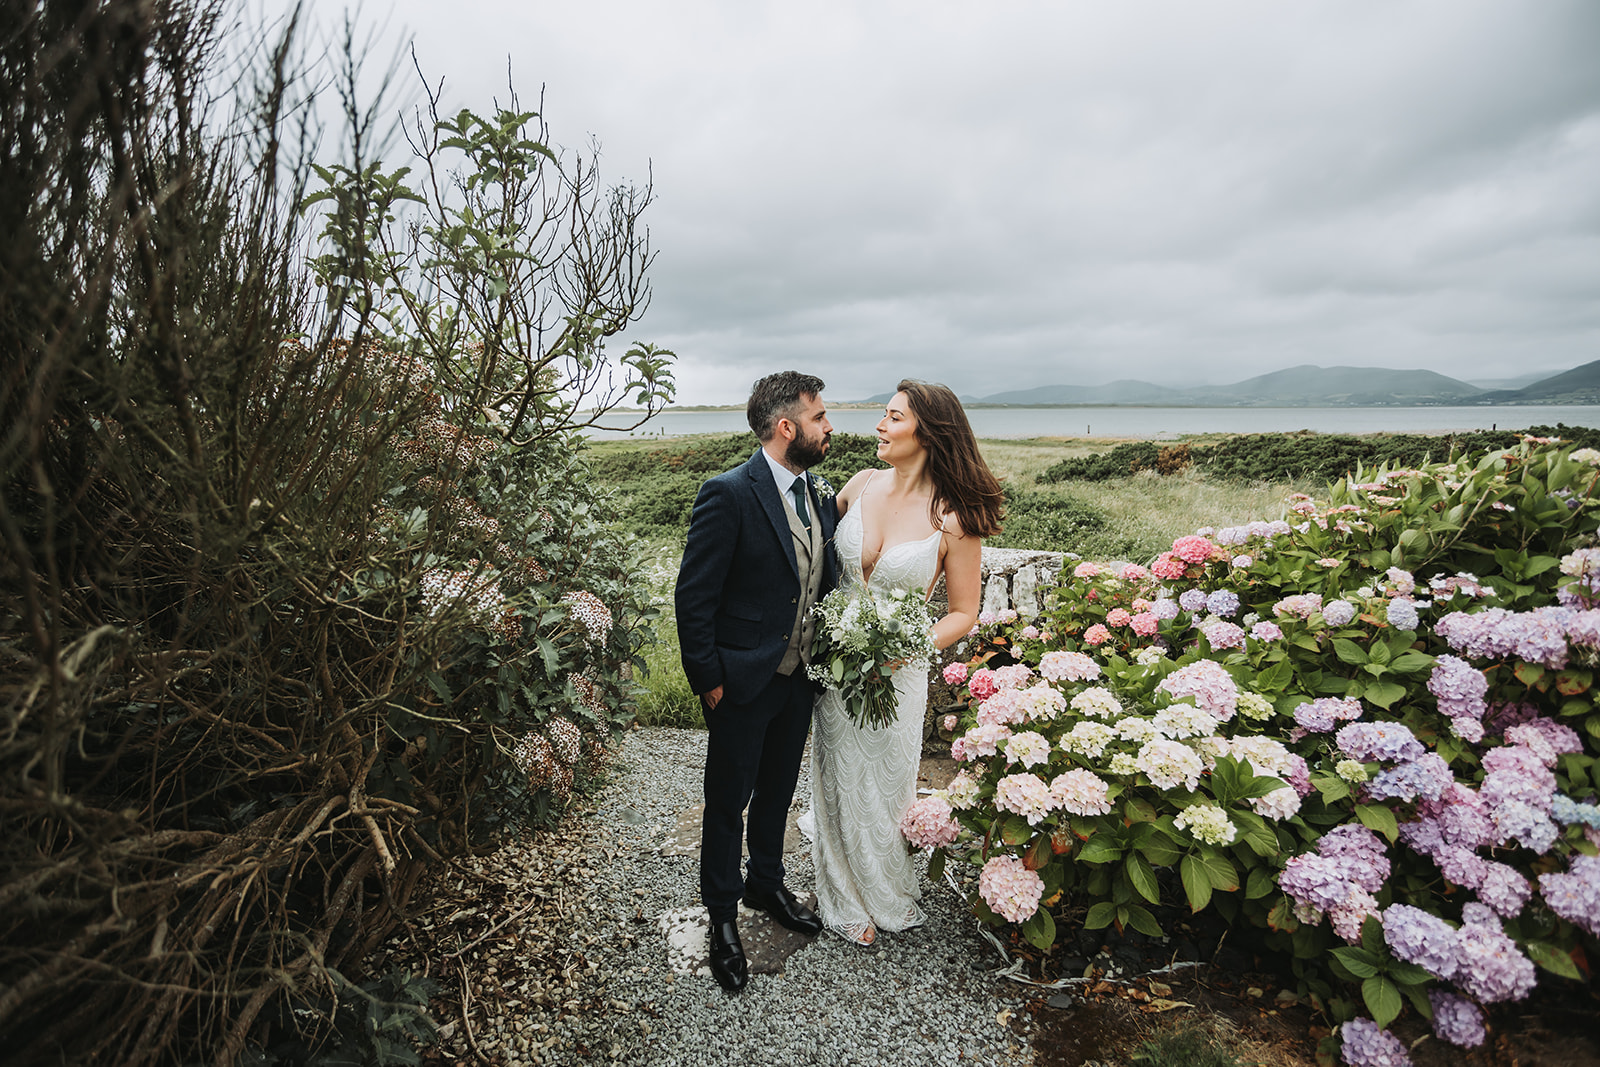 A wedding in Co. Kerry Ireland with views of the Wild Atlantic Way